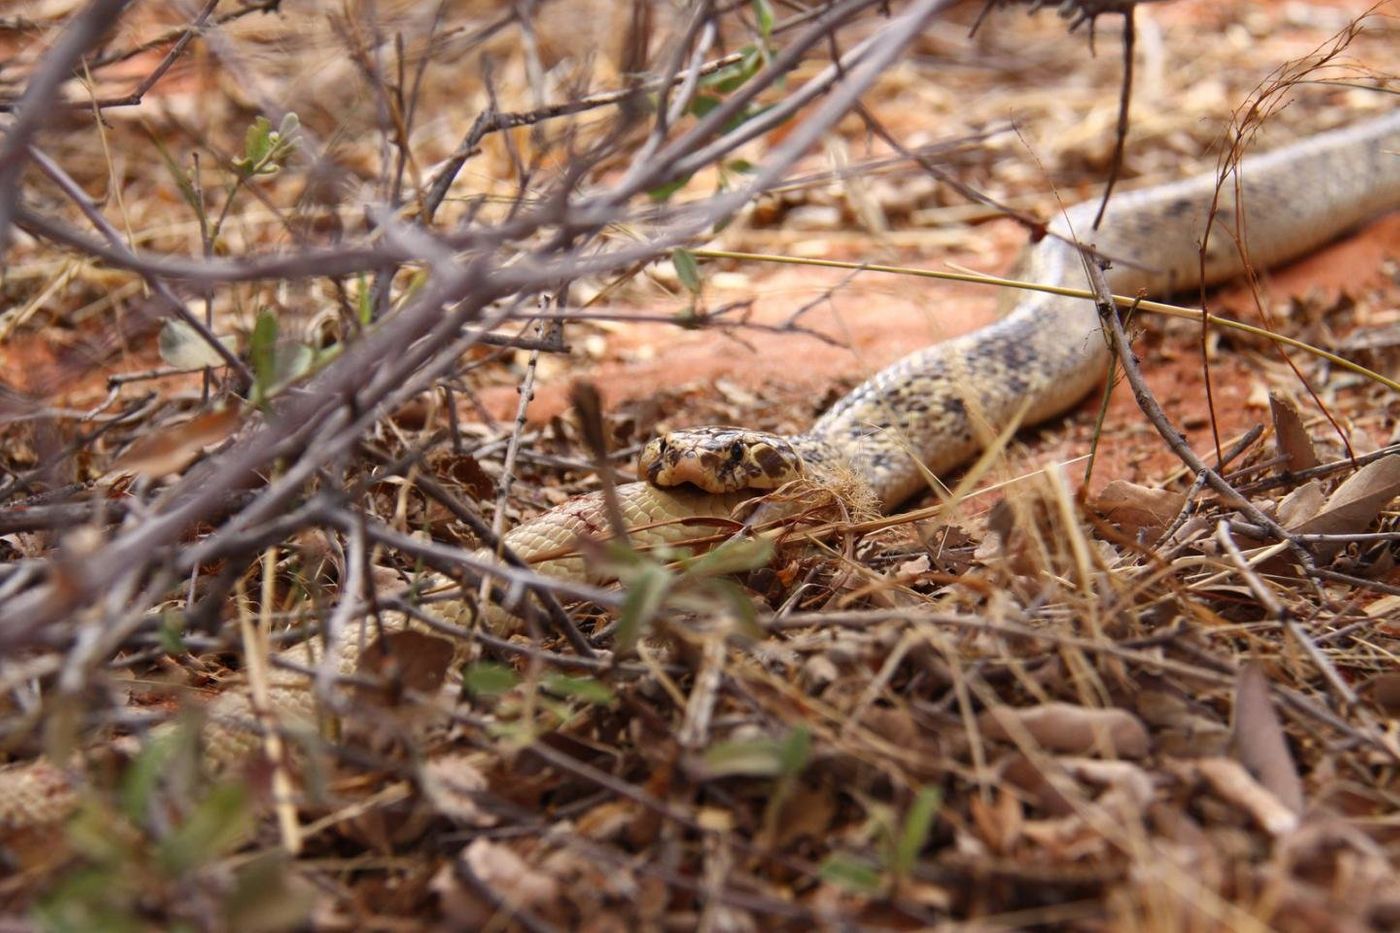 A cobra in the Kalahari Desert partakes in conspecific cannibalism.